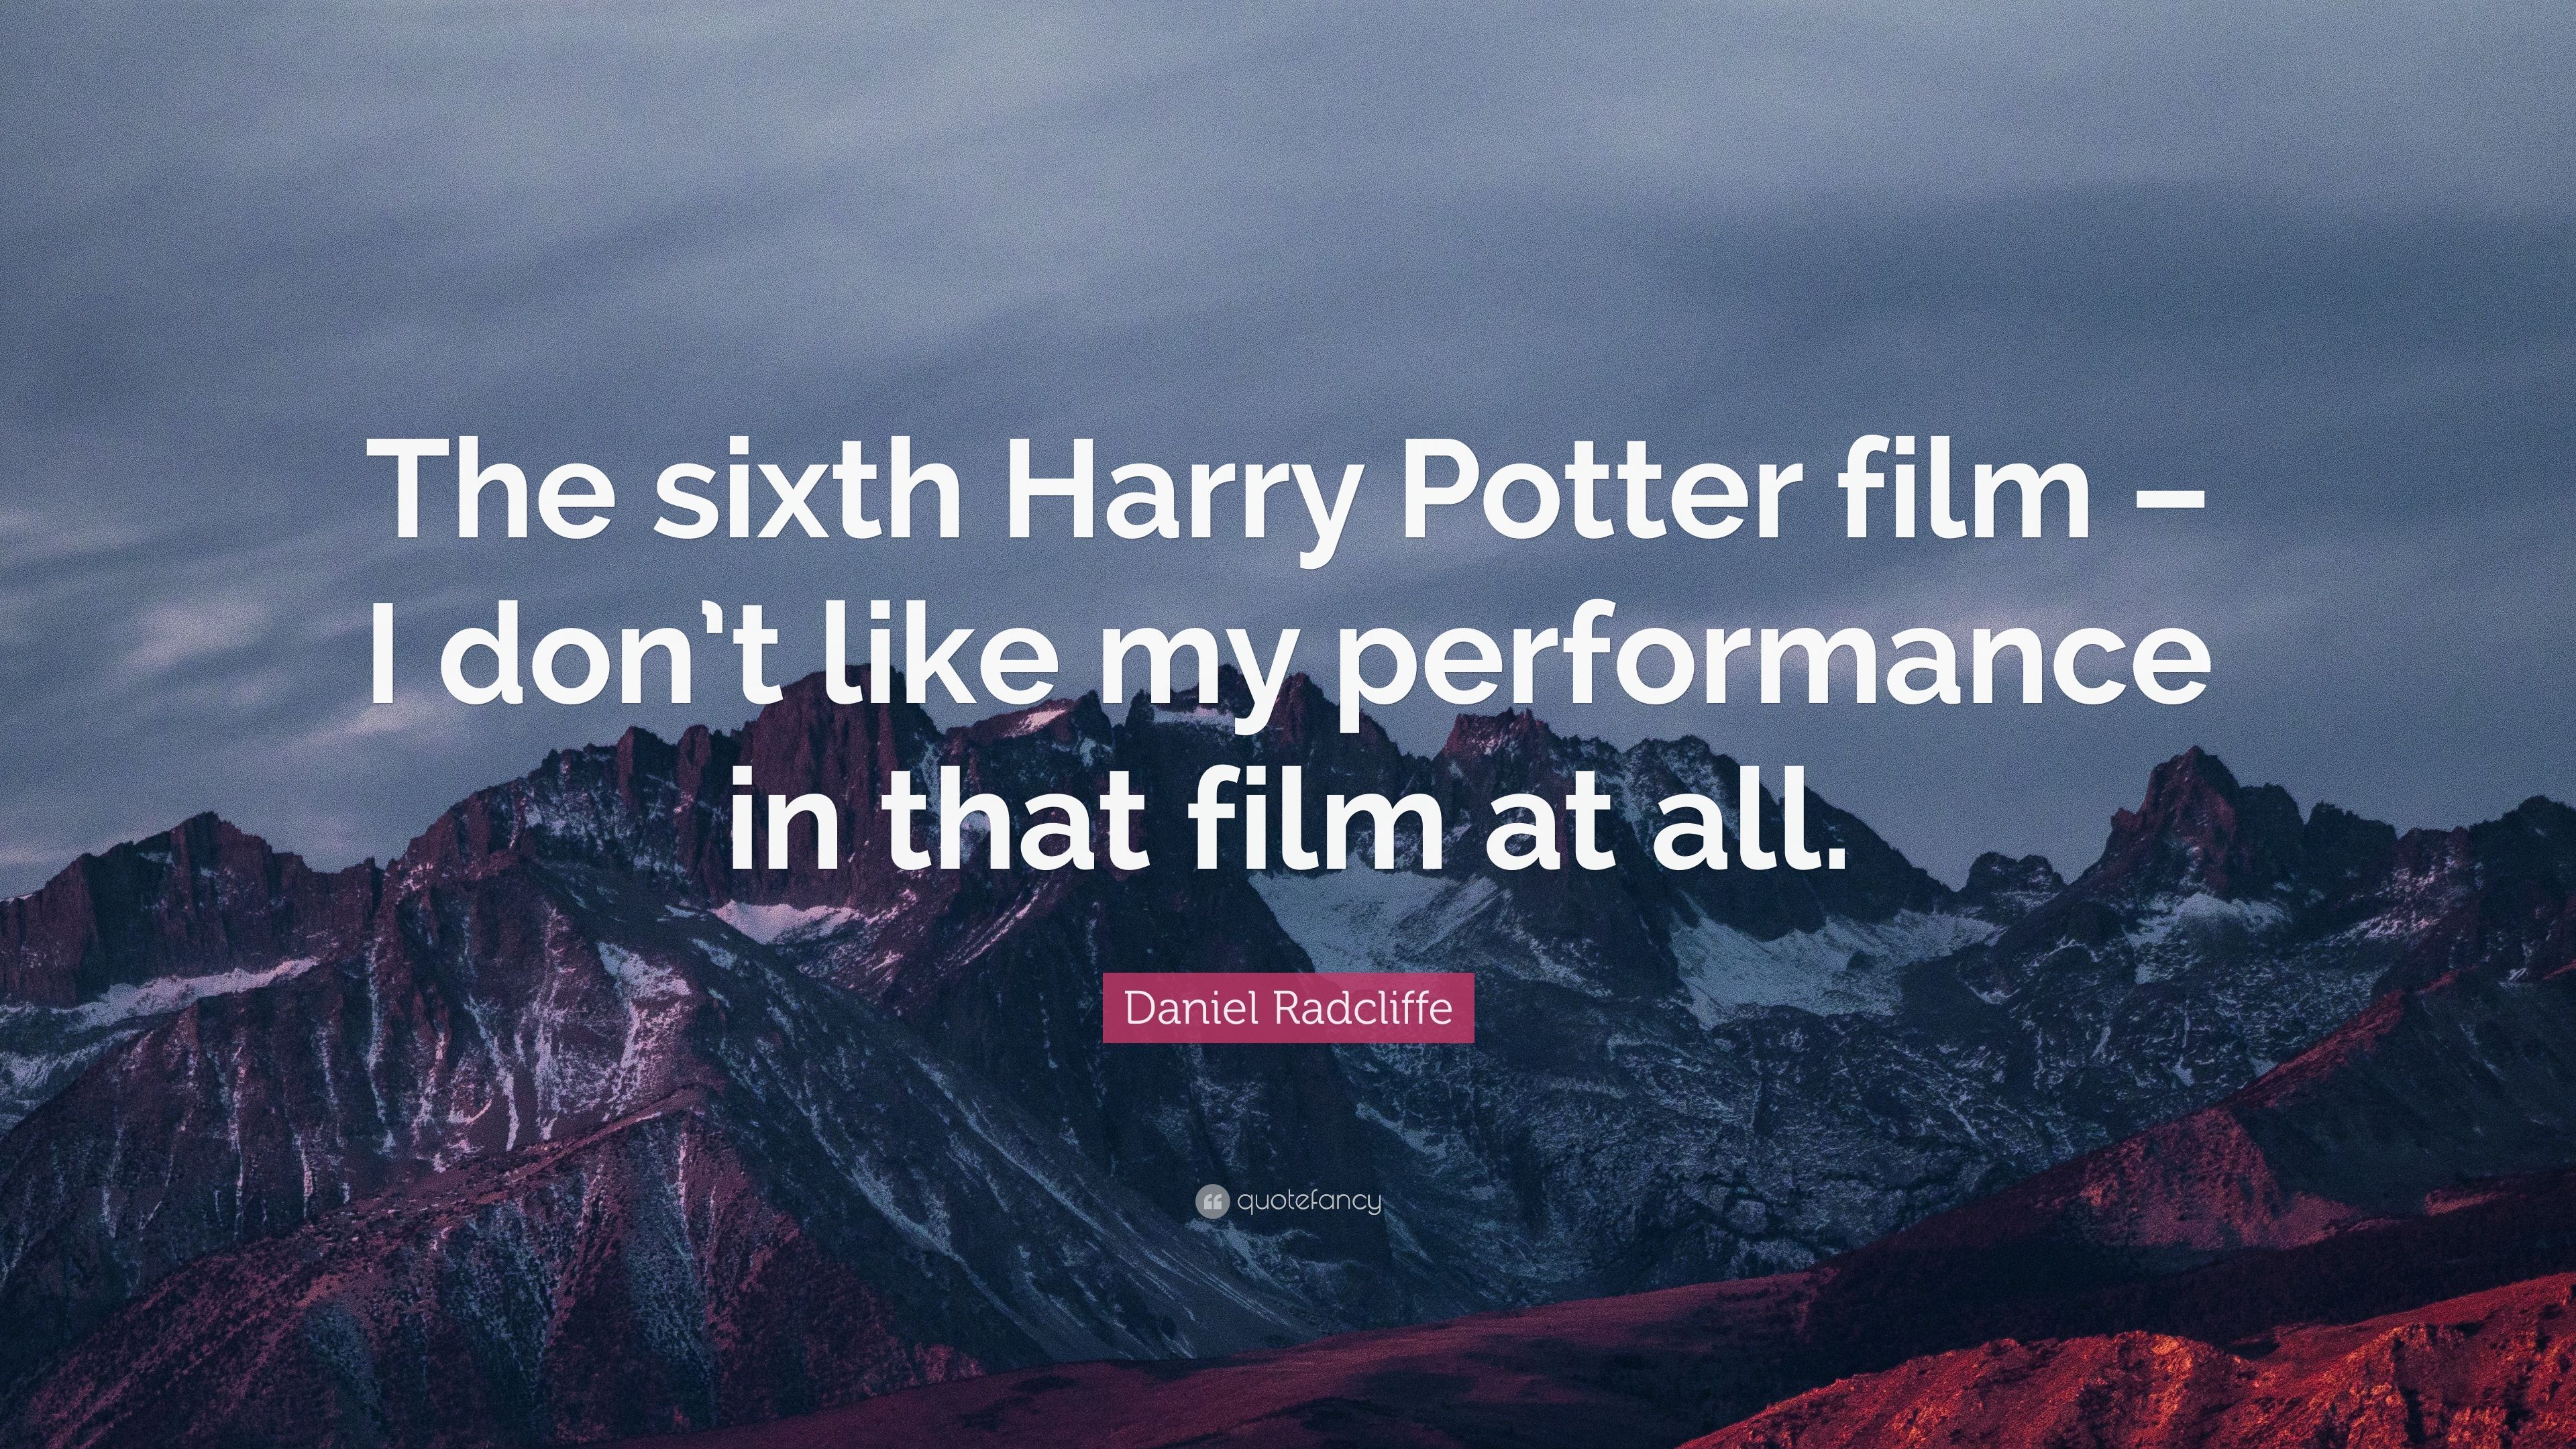 Daniel Radcliffe Quote: “The sixth Harry Potter film